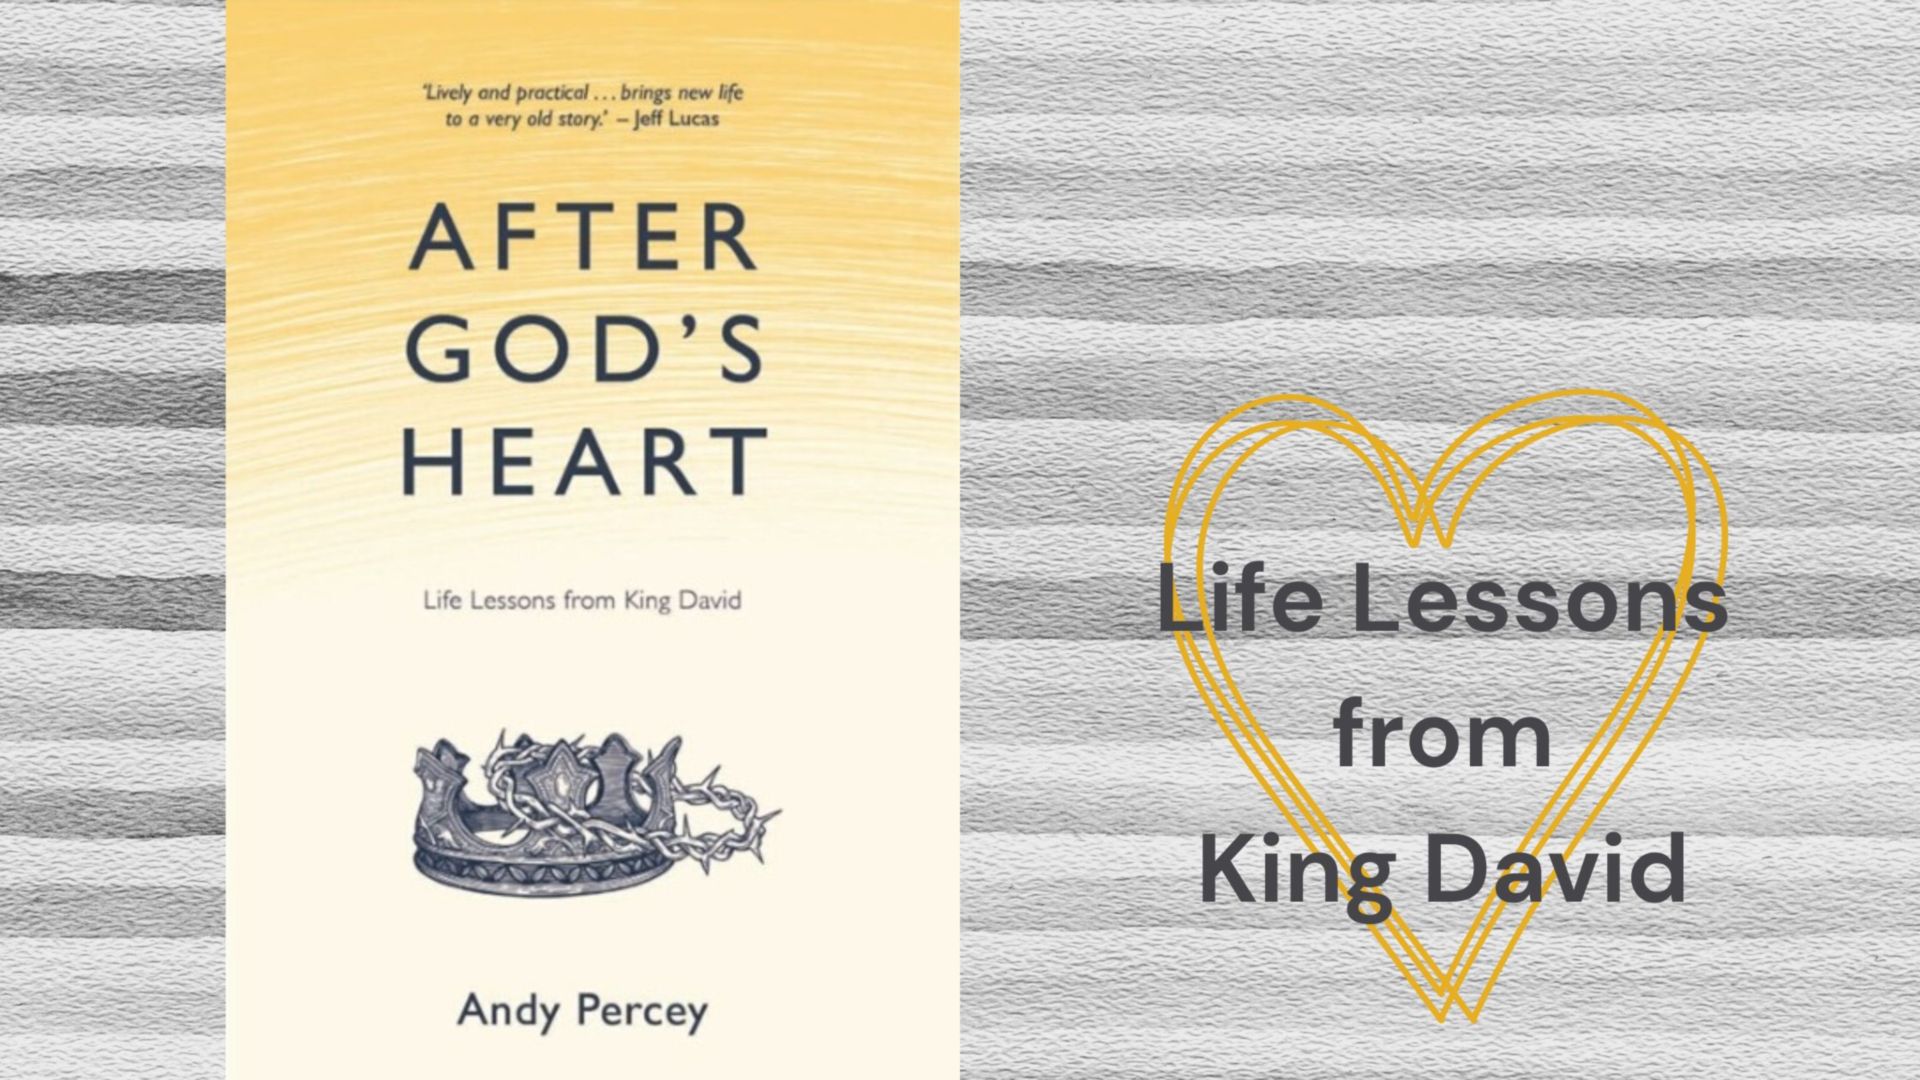 Interview with Andy Percey - author of 'After God's Heart'